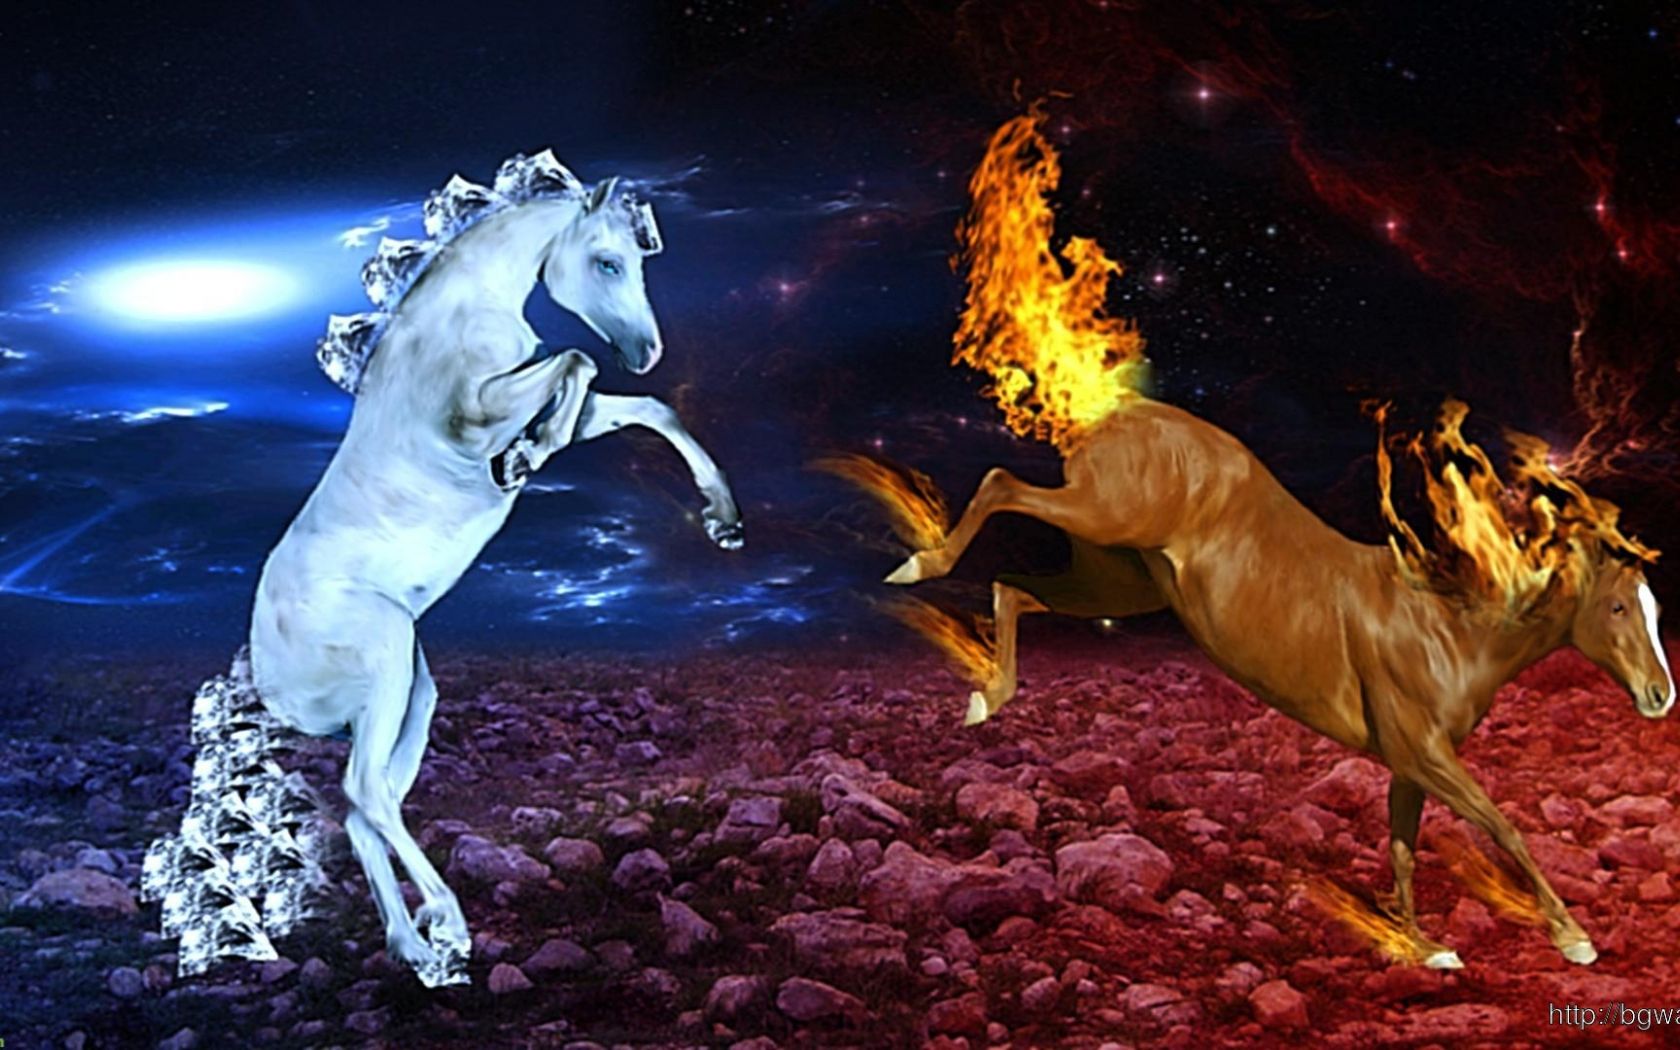 Free download horse ice and fire cool image wallpaper [1920x1080] for your Desktop, Mobile & Tablet. Explore Cool Horse Wallpaper. Horse Wallpaper Download, Horse Wallpaper for Desktop, Indian Horse Wallpaper